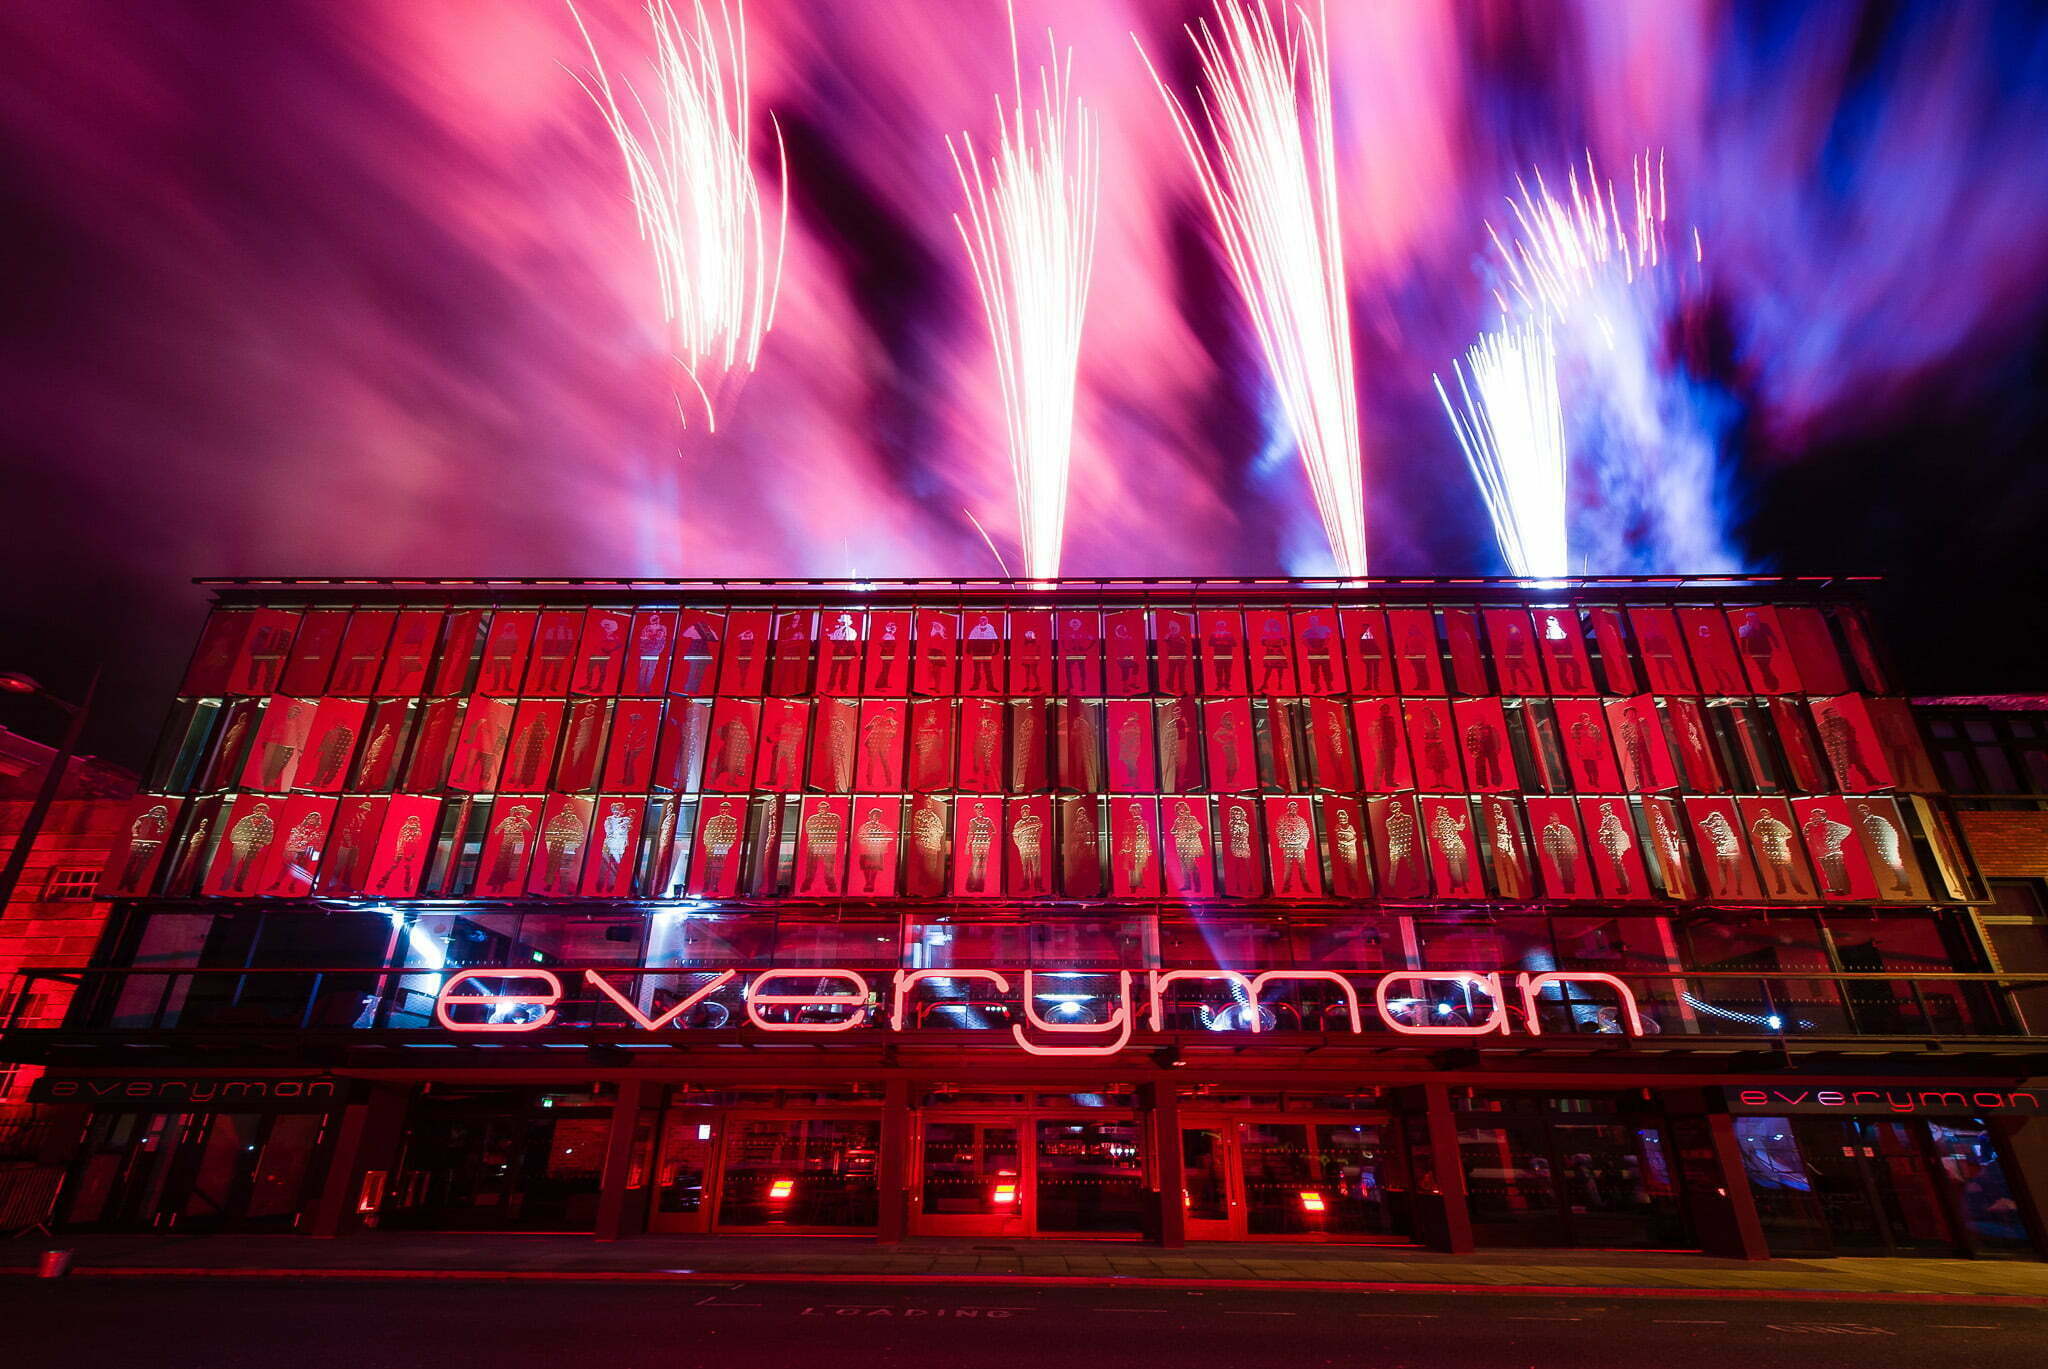 The Everyman Theatre Liverpool reopening